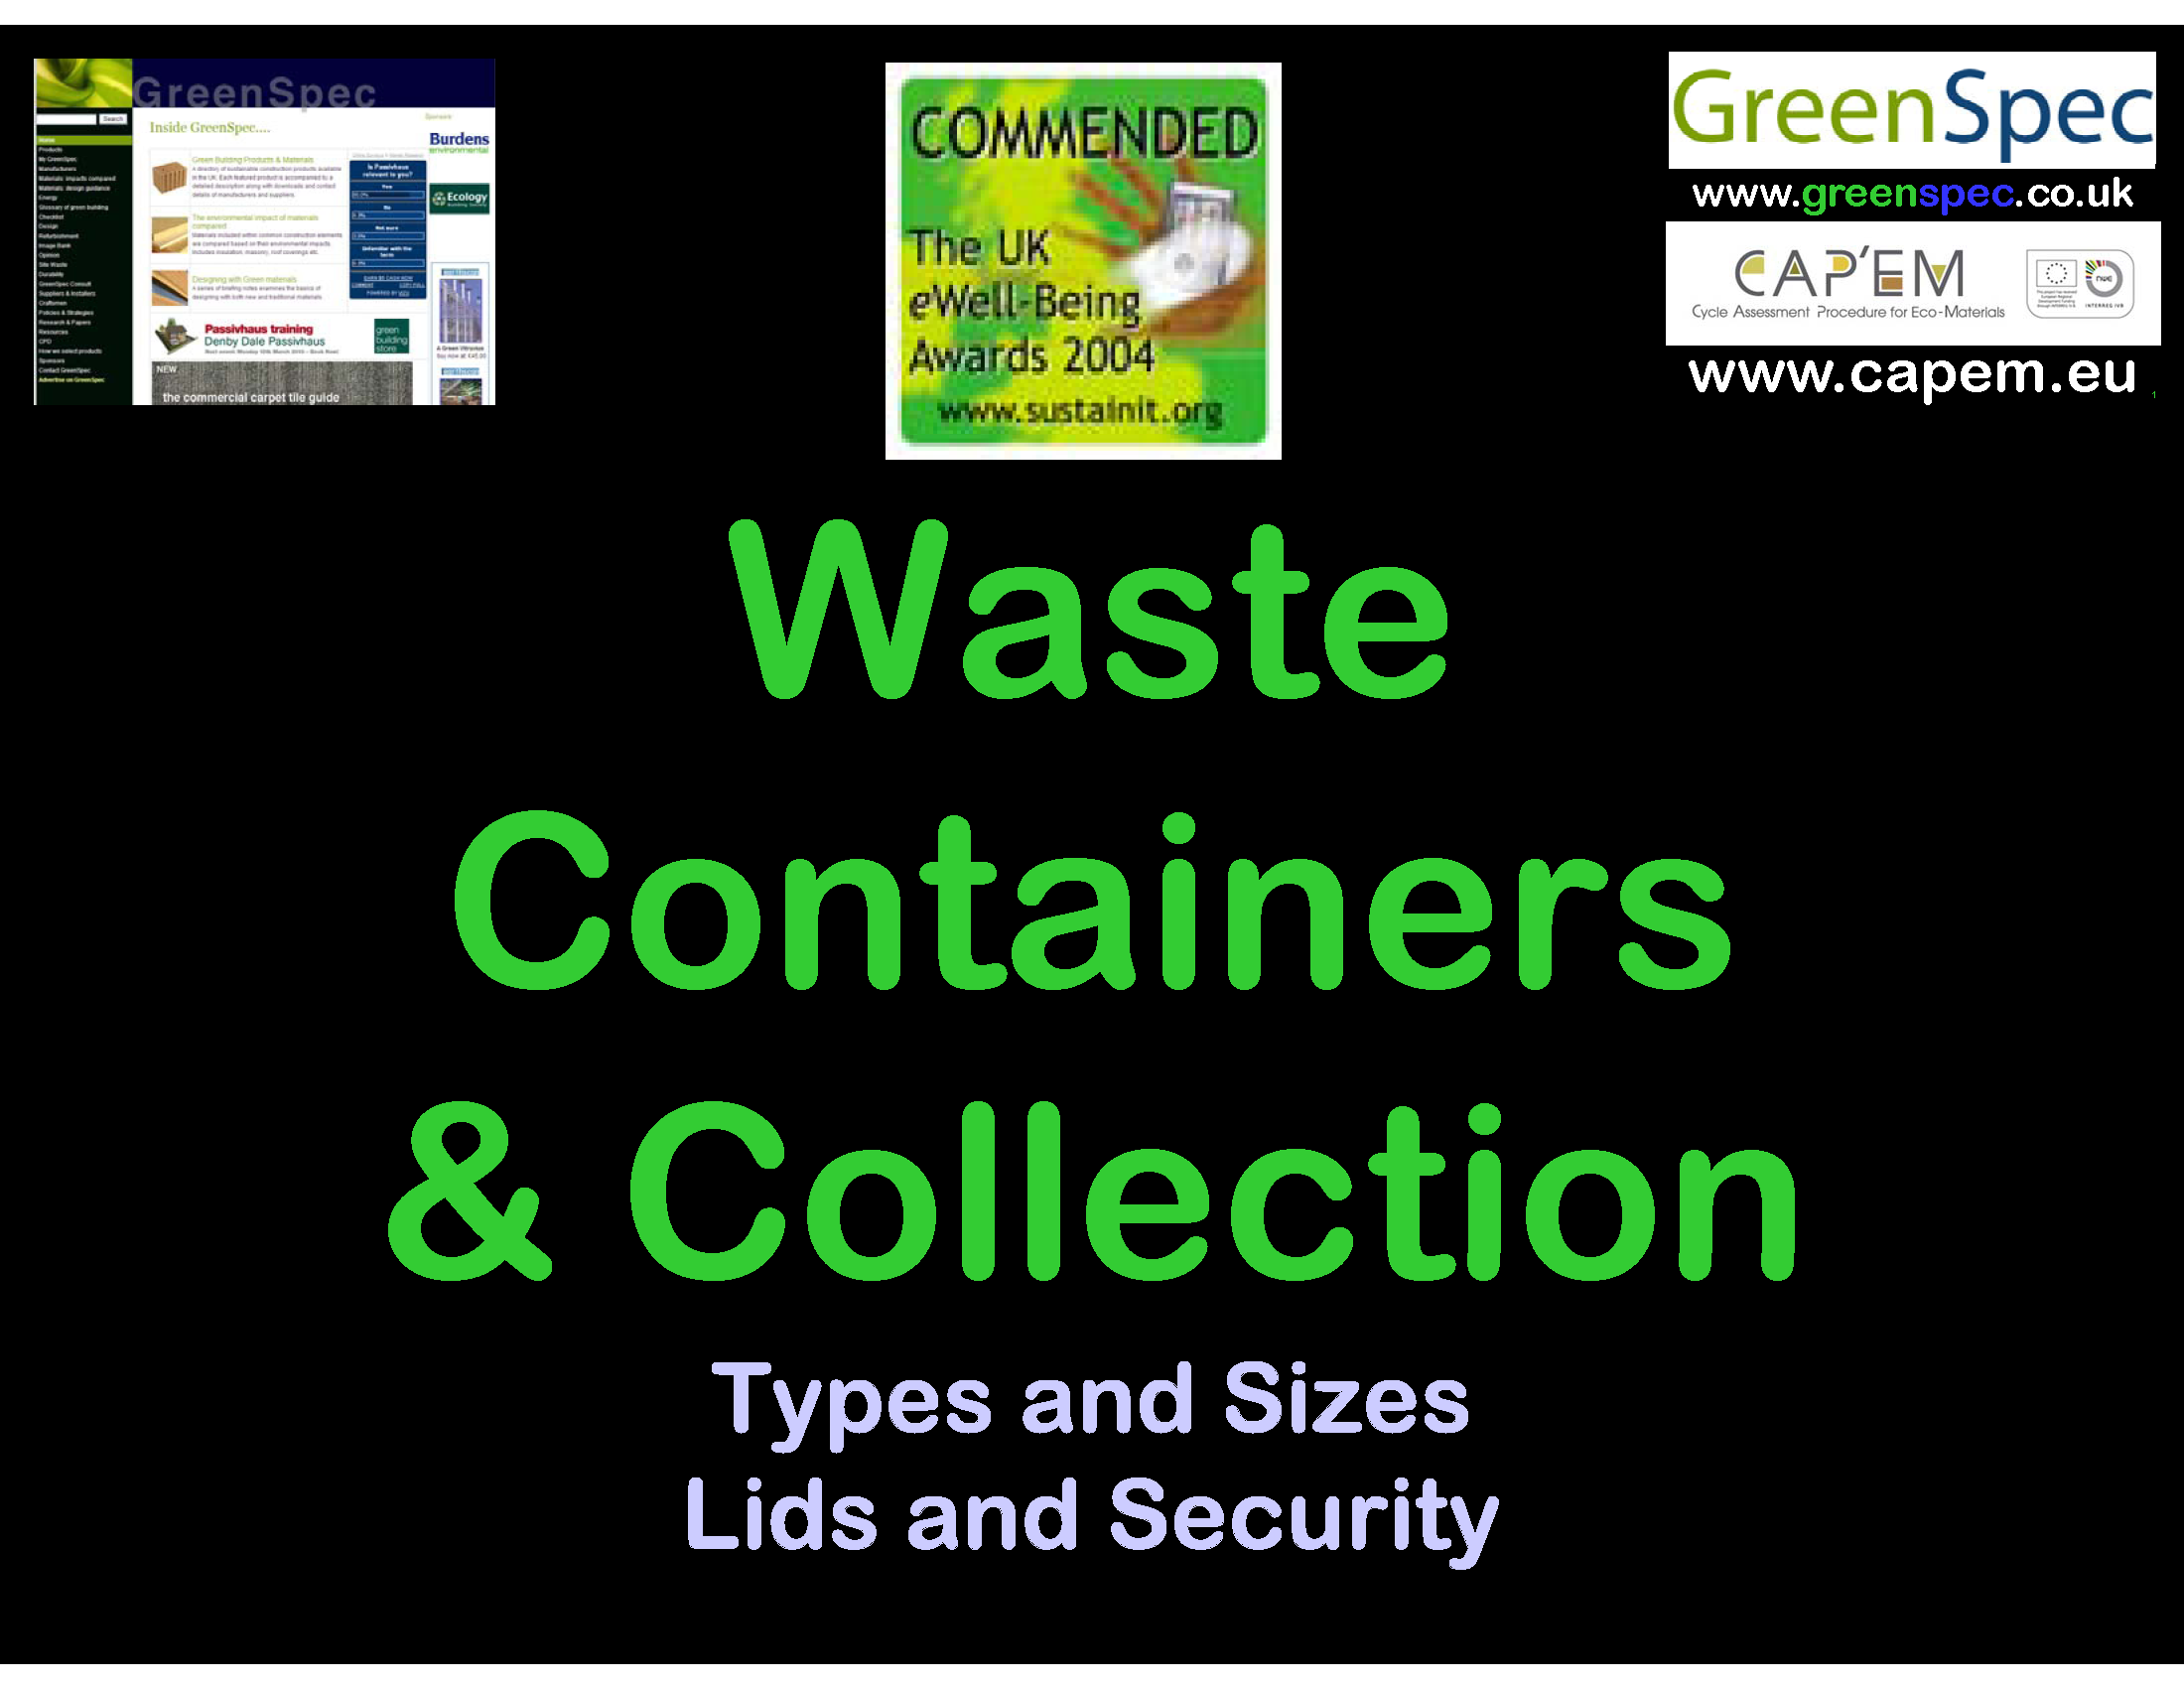 WasteContainers, Recycled Content Building Products Site Waste Minimisation (Event) G#187